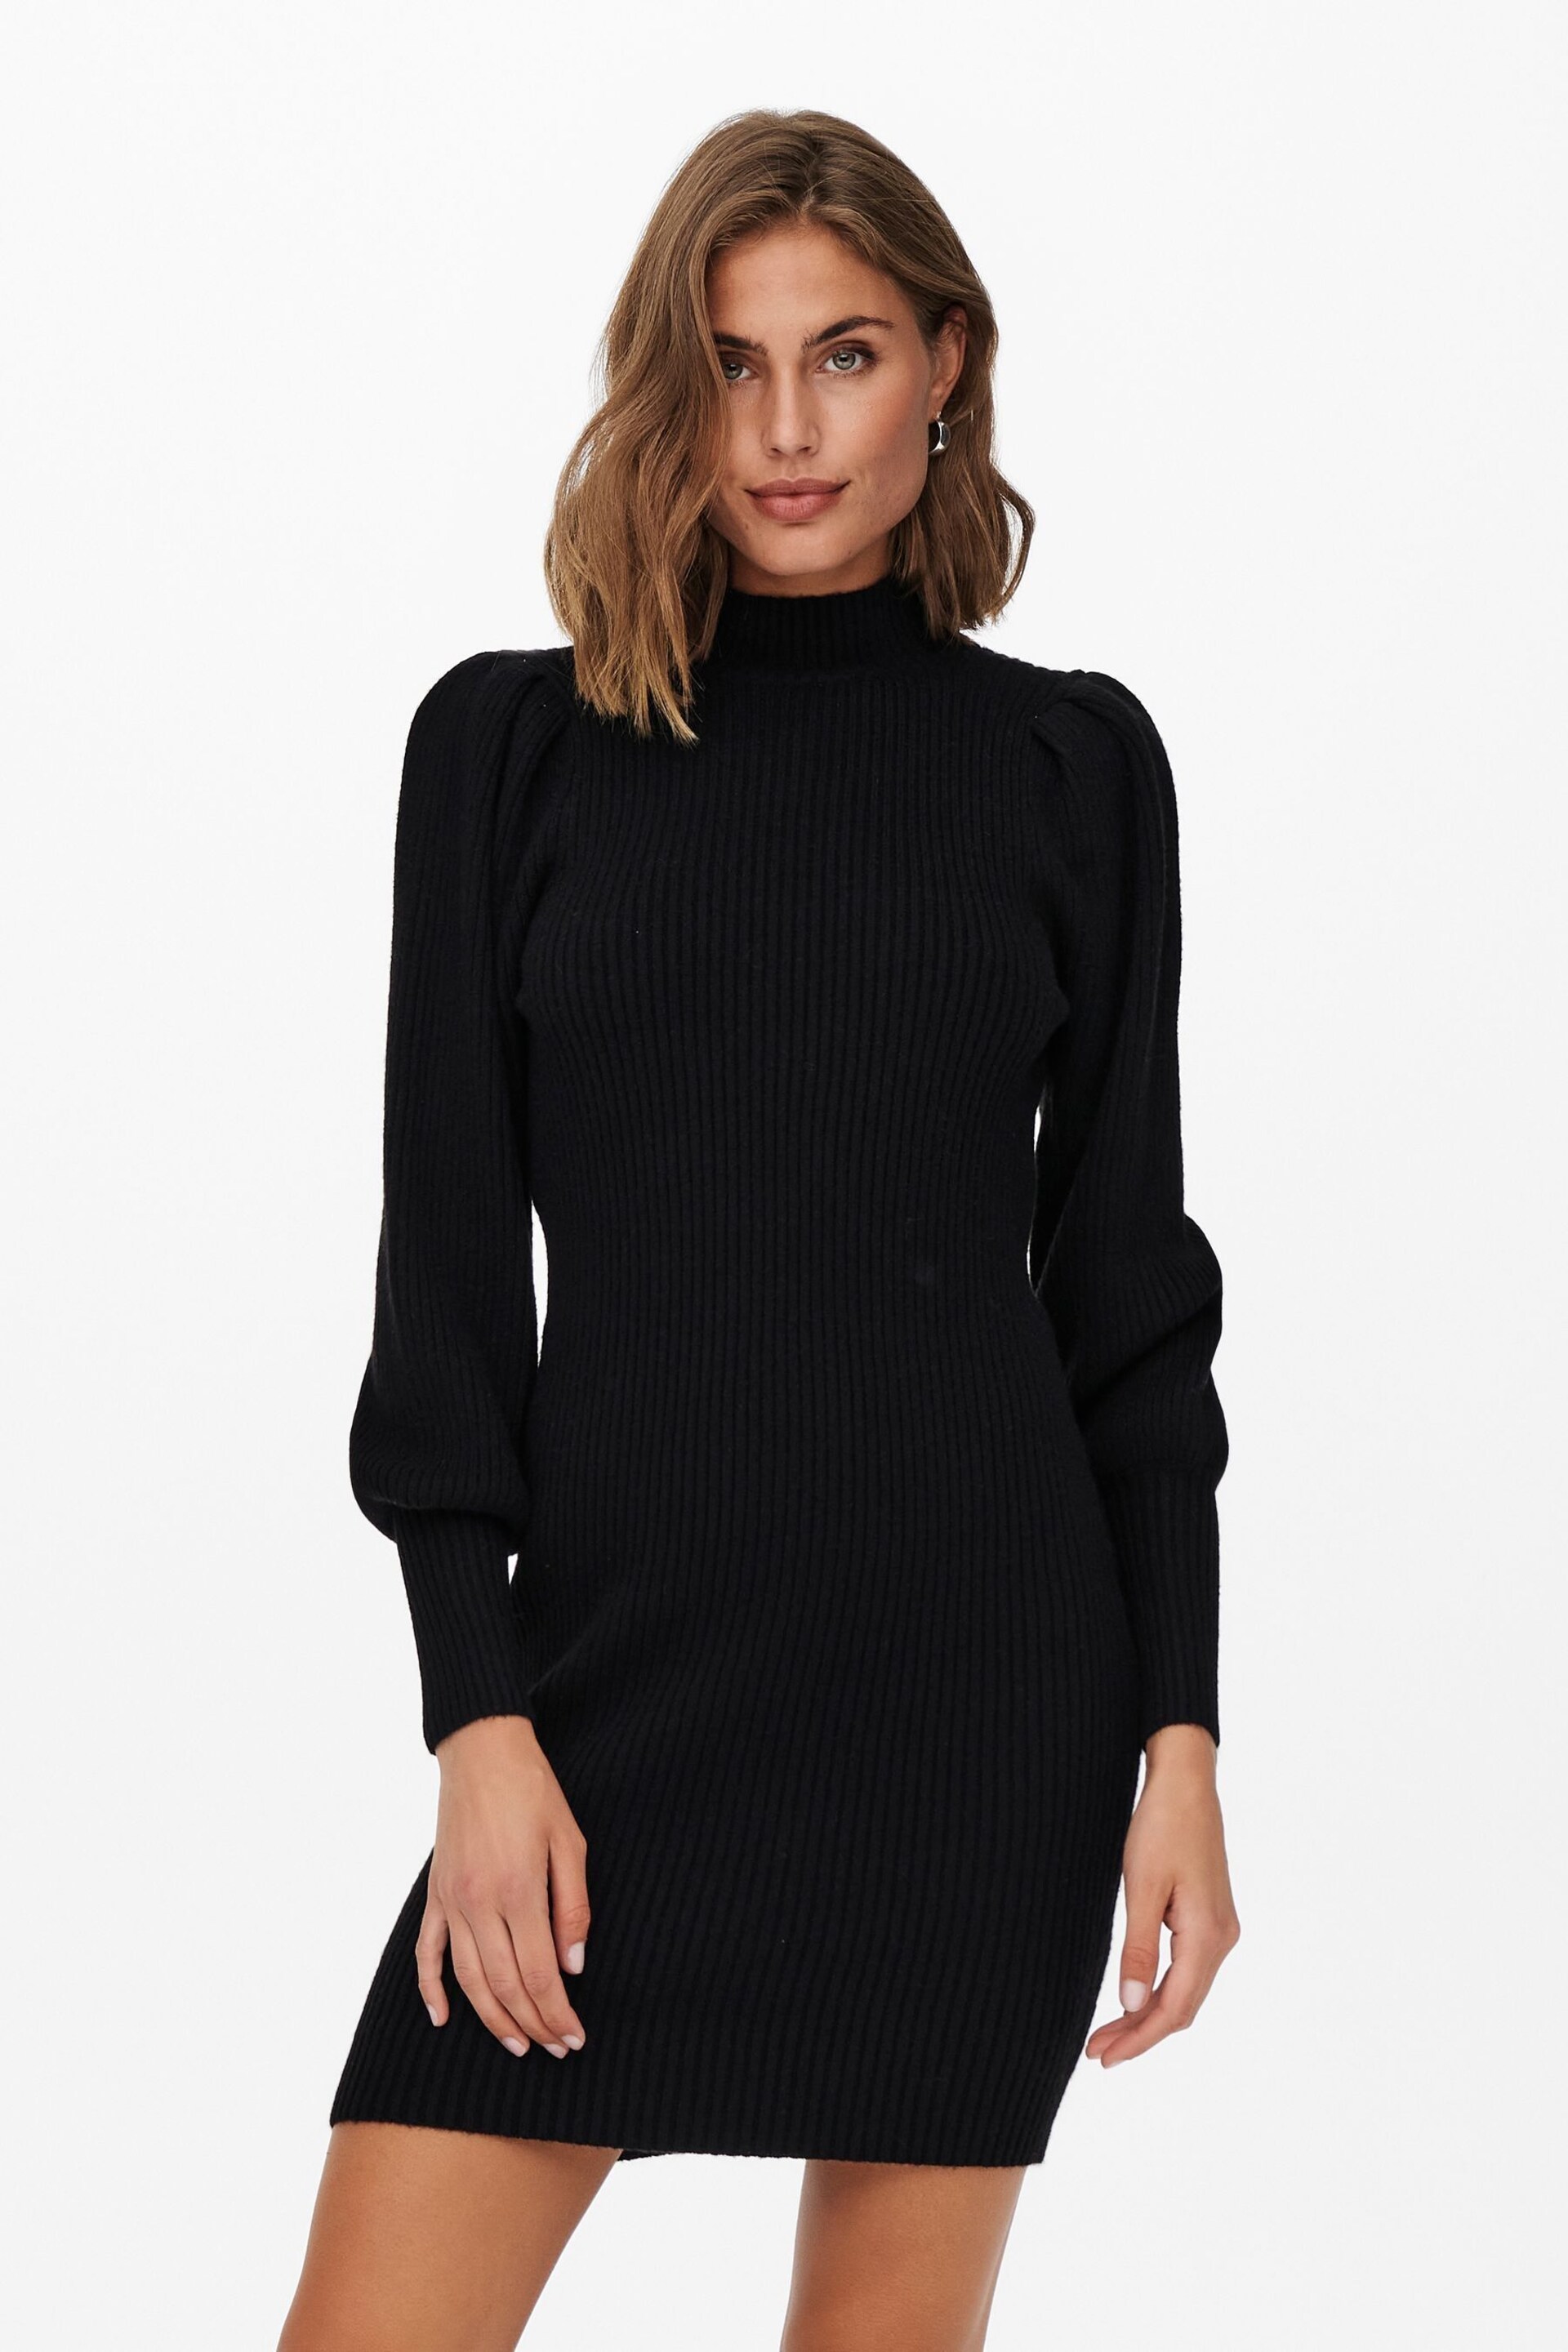 ONLY Black Puff Sleeve Knitted Jumper Dress - Image 1 of 5